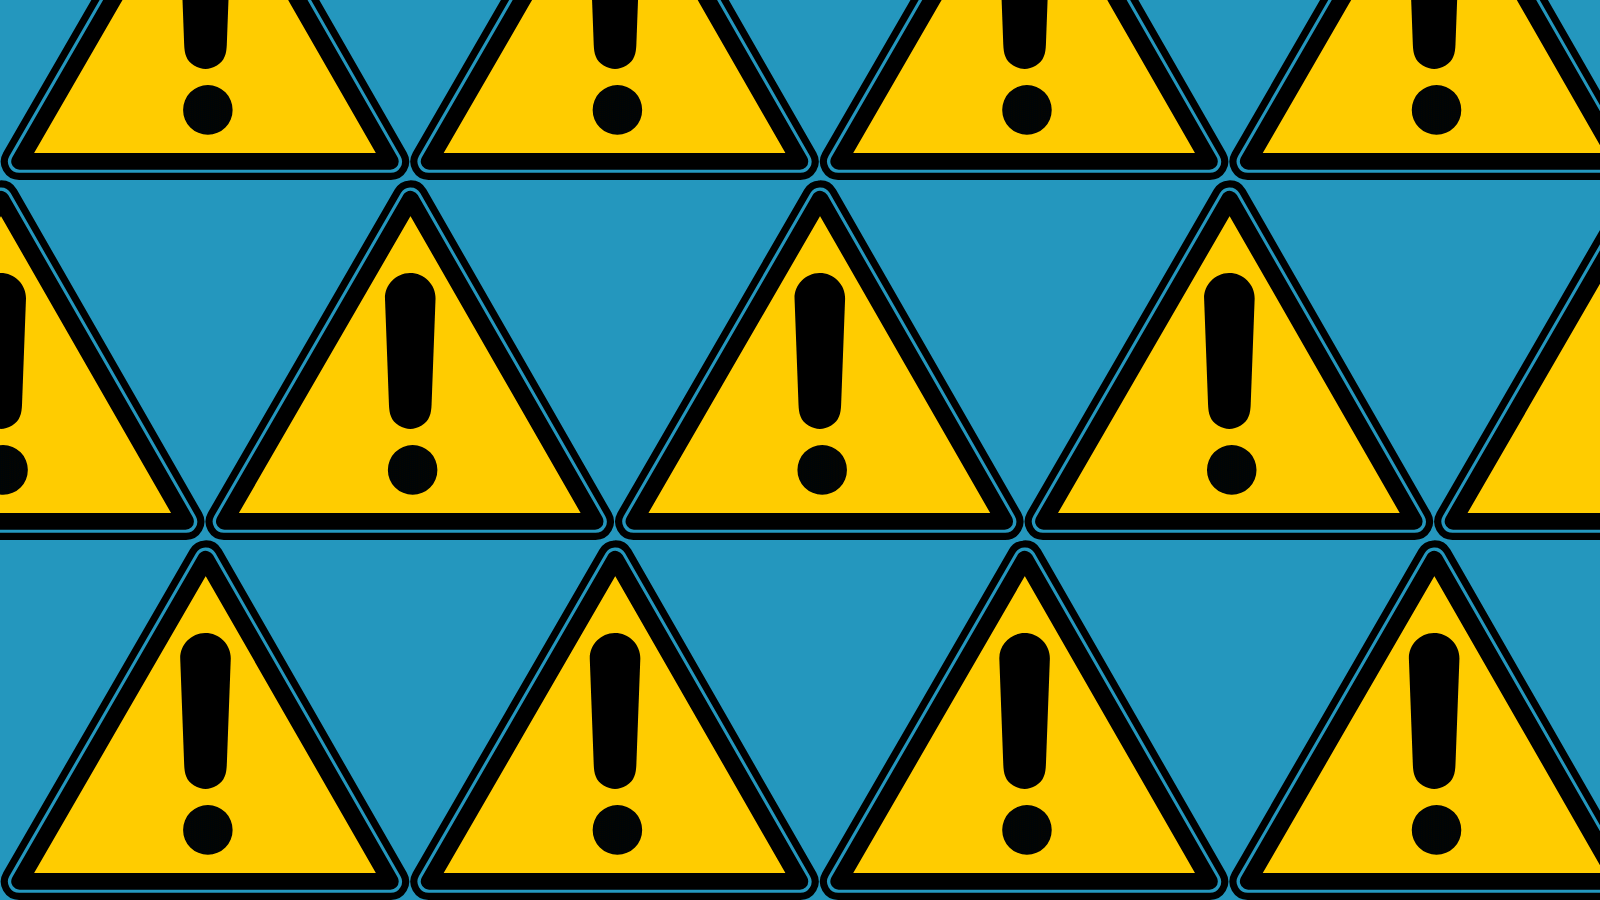 The warning icon in a repeating pattern